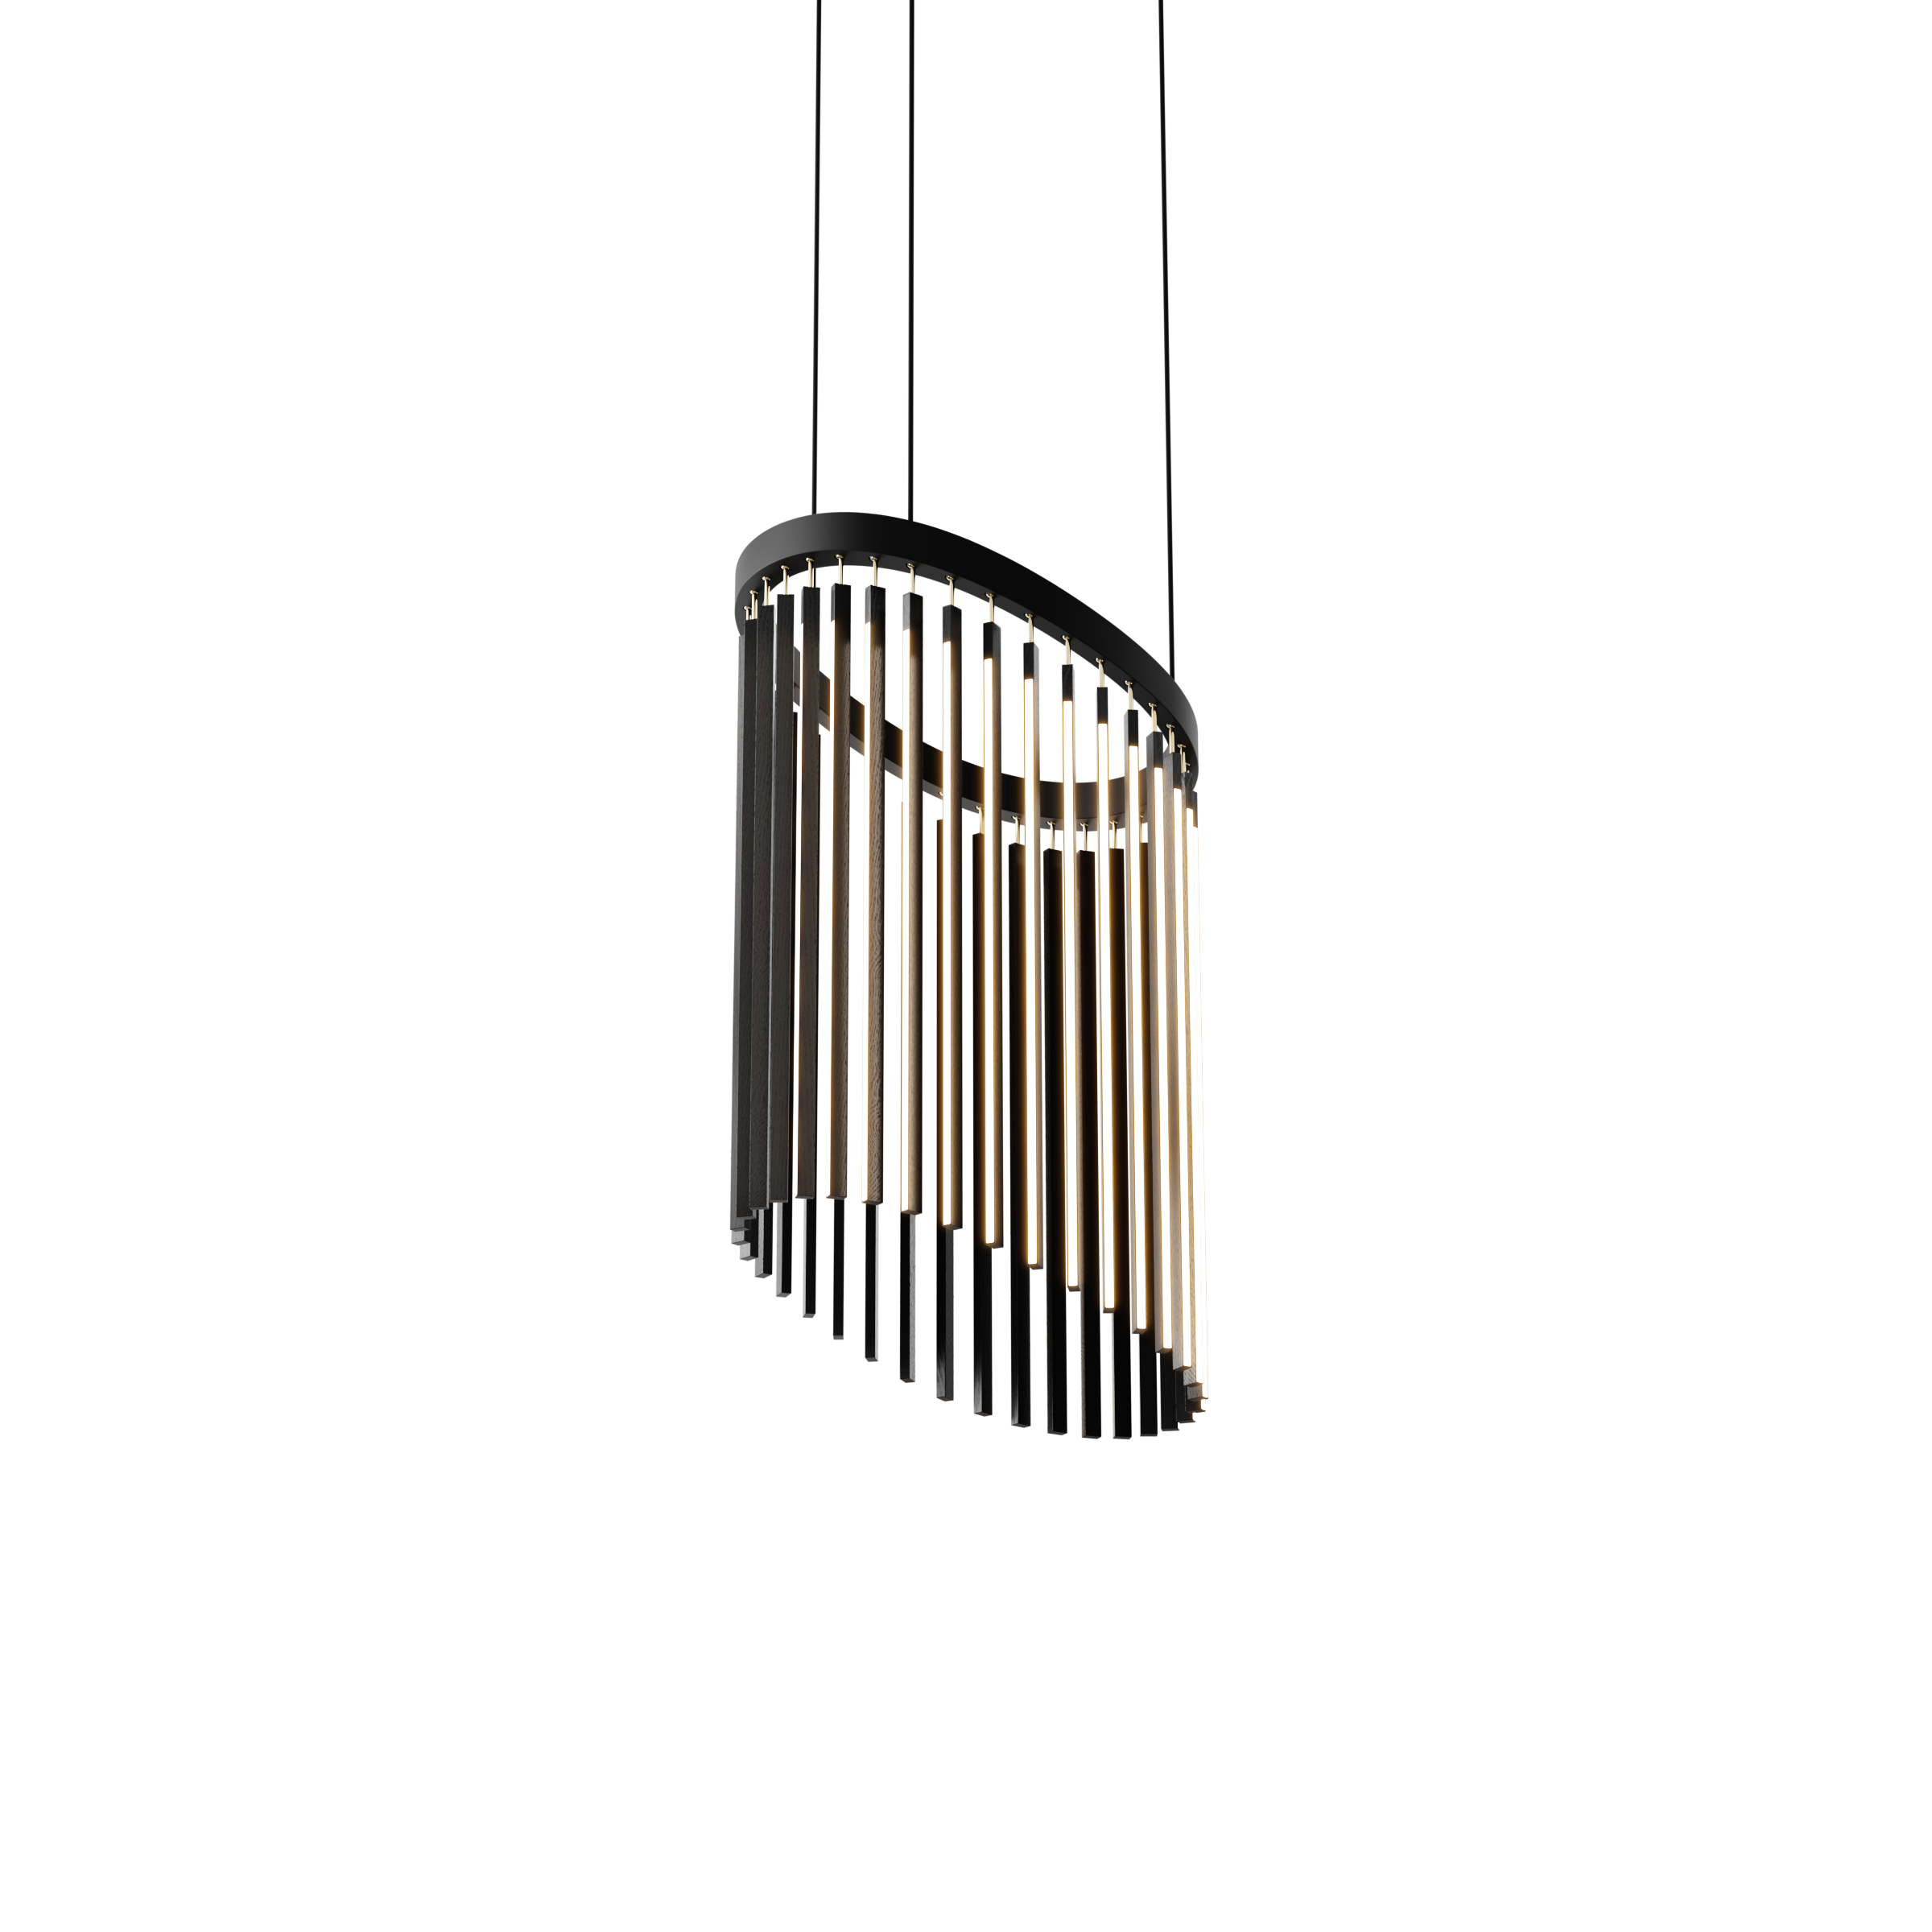 Image of a Stickbulb Chime lighting fixture. The modern fixture consists of sleek wooden beams with multiple integrated LED bulbs.